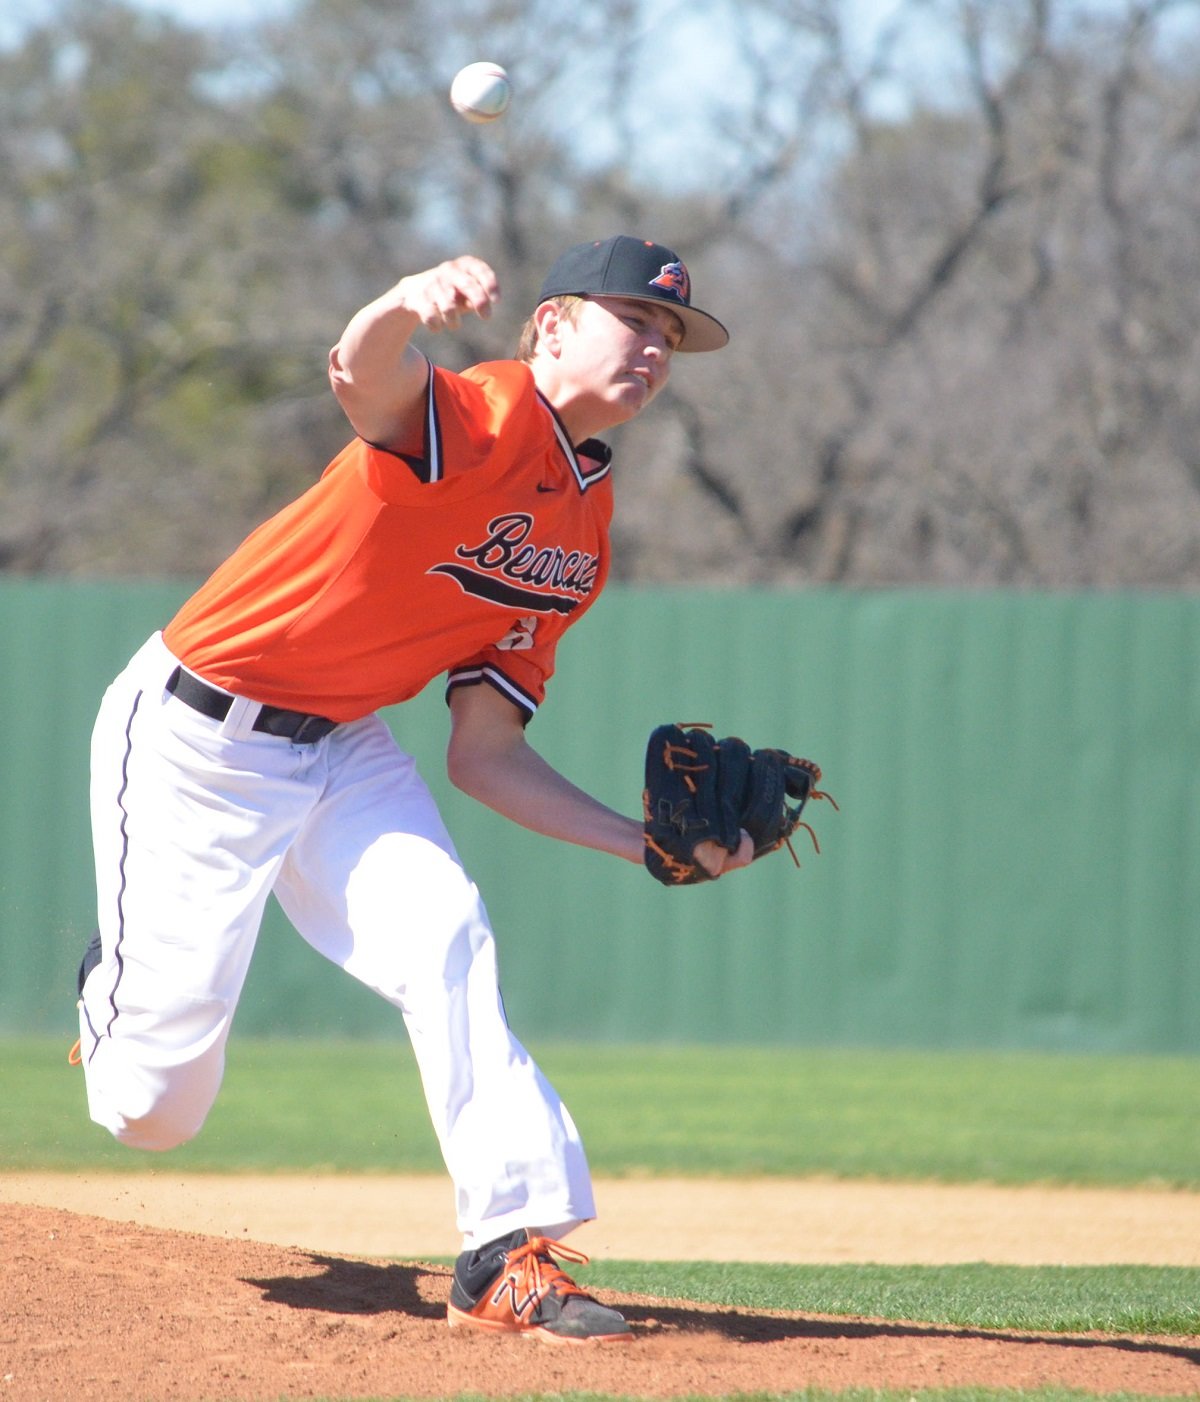 Aledo junior pitcher Steven Swift opens the 2017 season with a fast ball Thursday afternoon at the AHS baseball field in the opening game of the Southwest Ford Classic. The Bearcats defeated Birdville, 7-6. The Bearcats will continue tournament play at 6 p.m. today at home against Ennis. Photo by Tony Eierdam